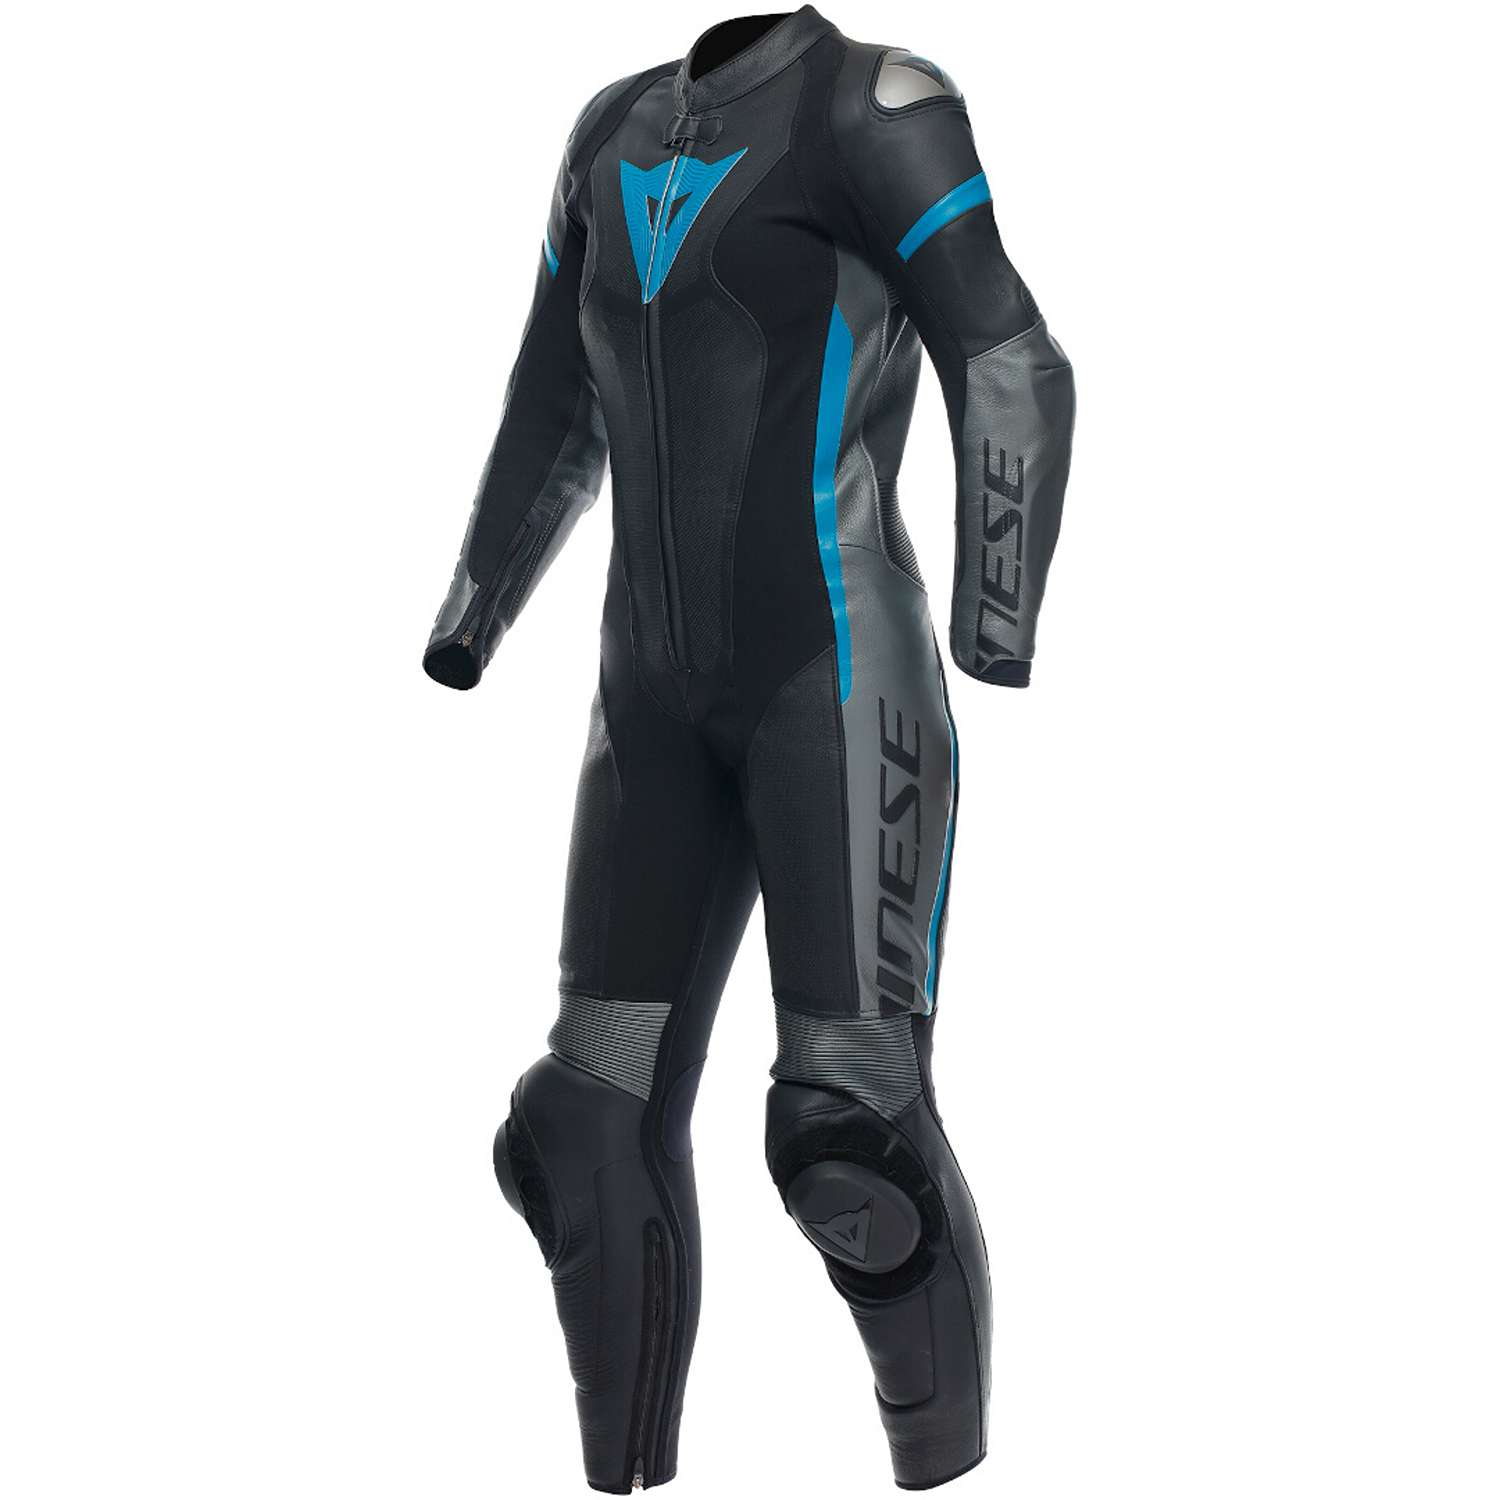 Image of Dainese Grobnik Lady Leather 1Pc Suit Perf Black Anthracite Teal Size 54 ID 8051019498212